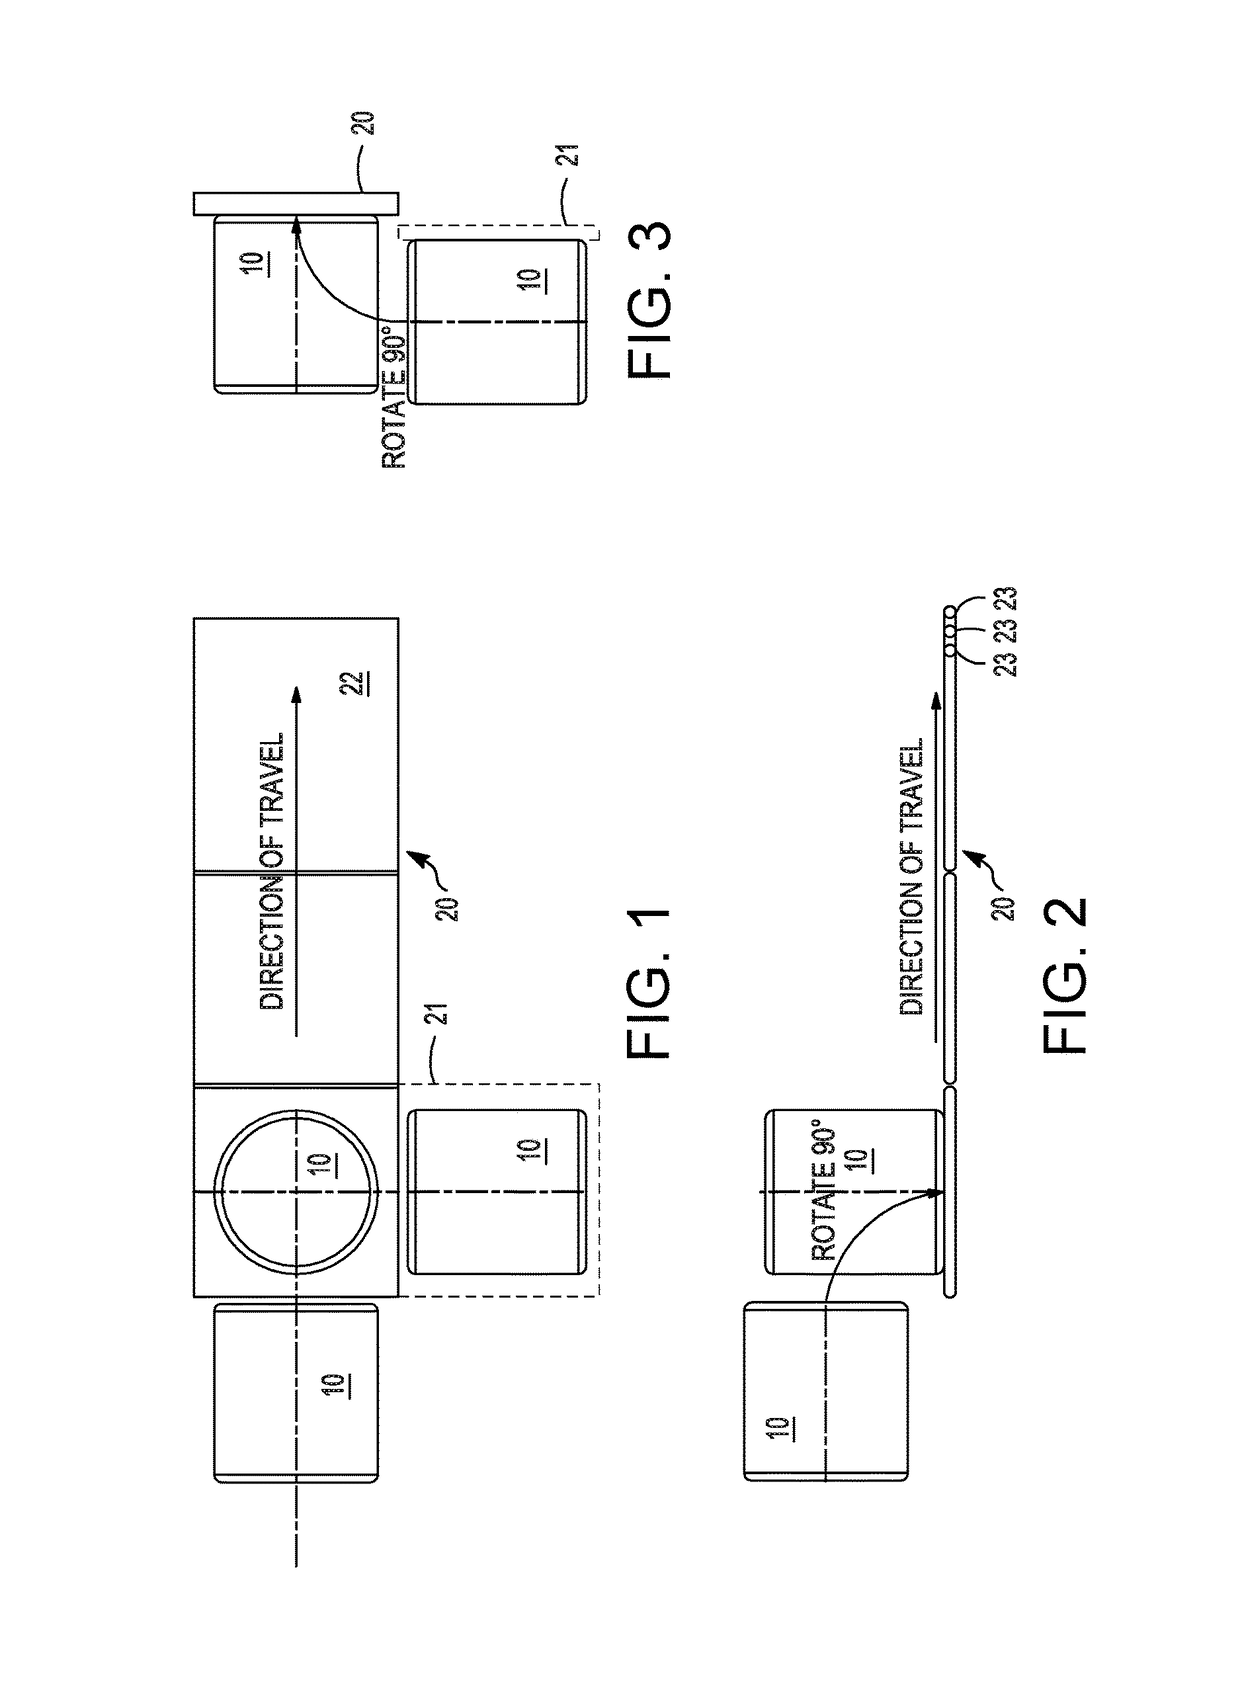 Cotton module unwrapping method and apparatus